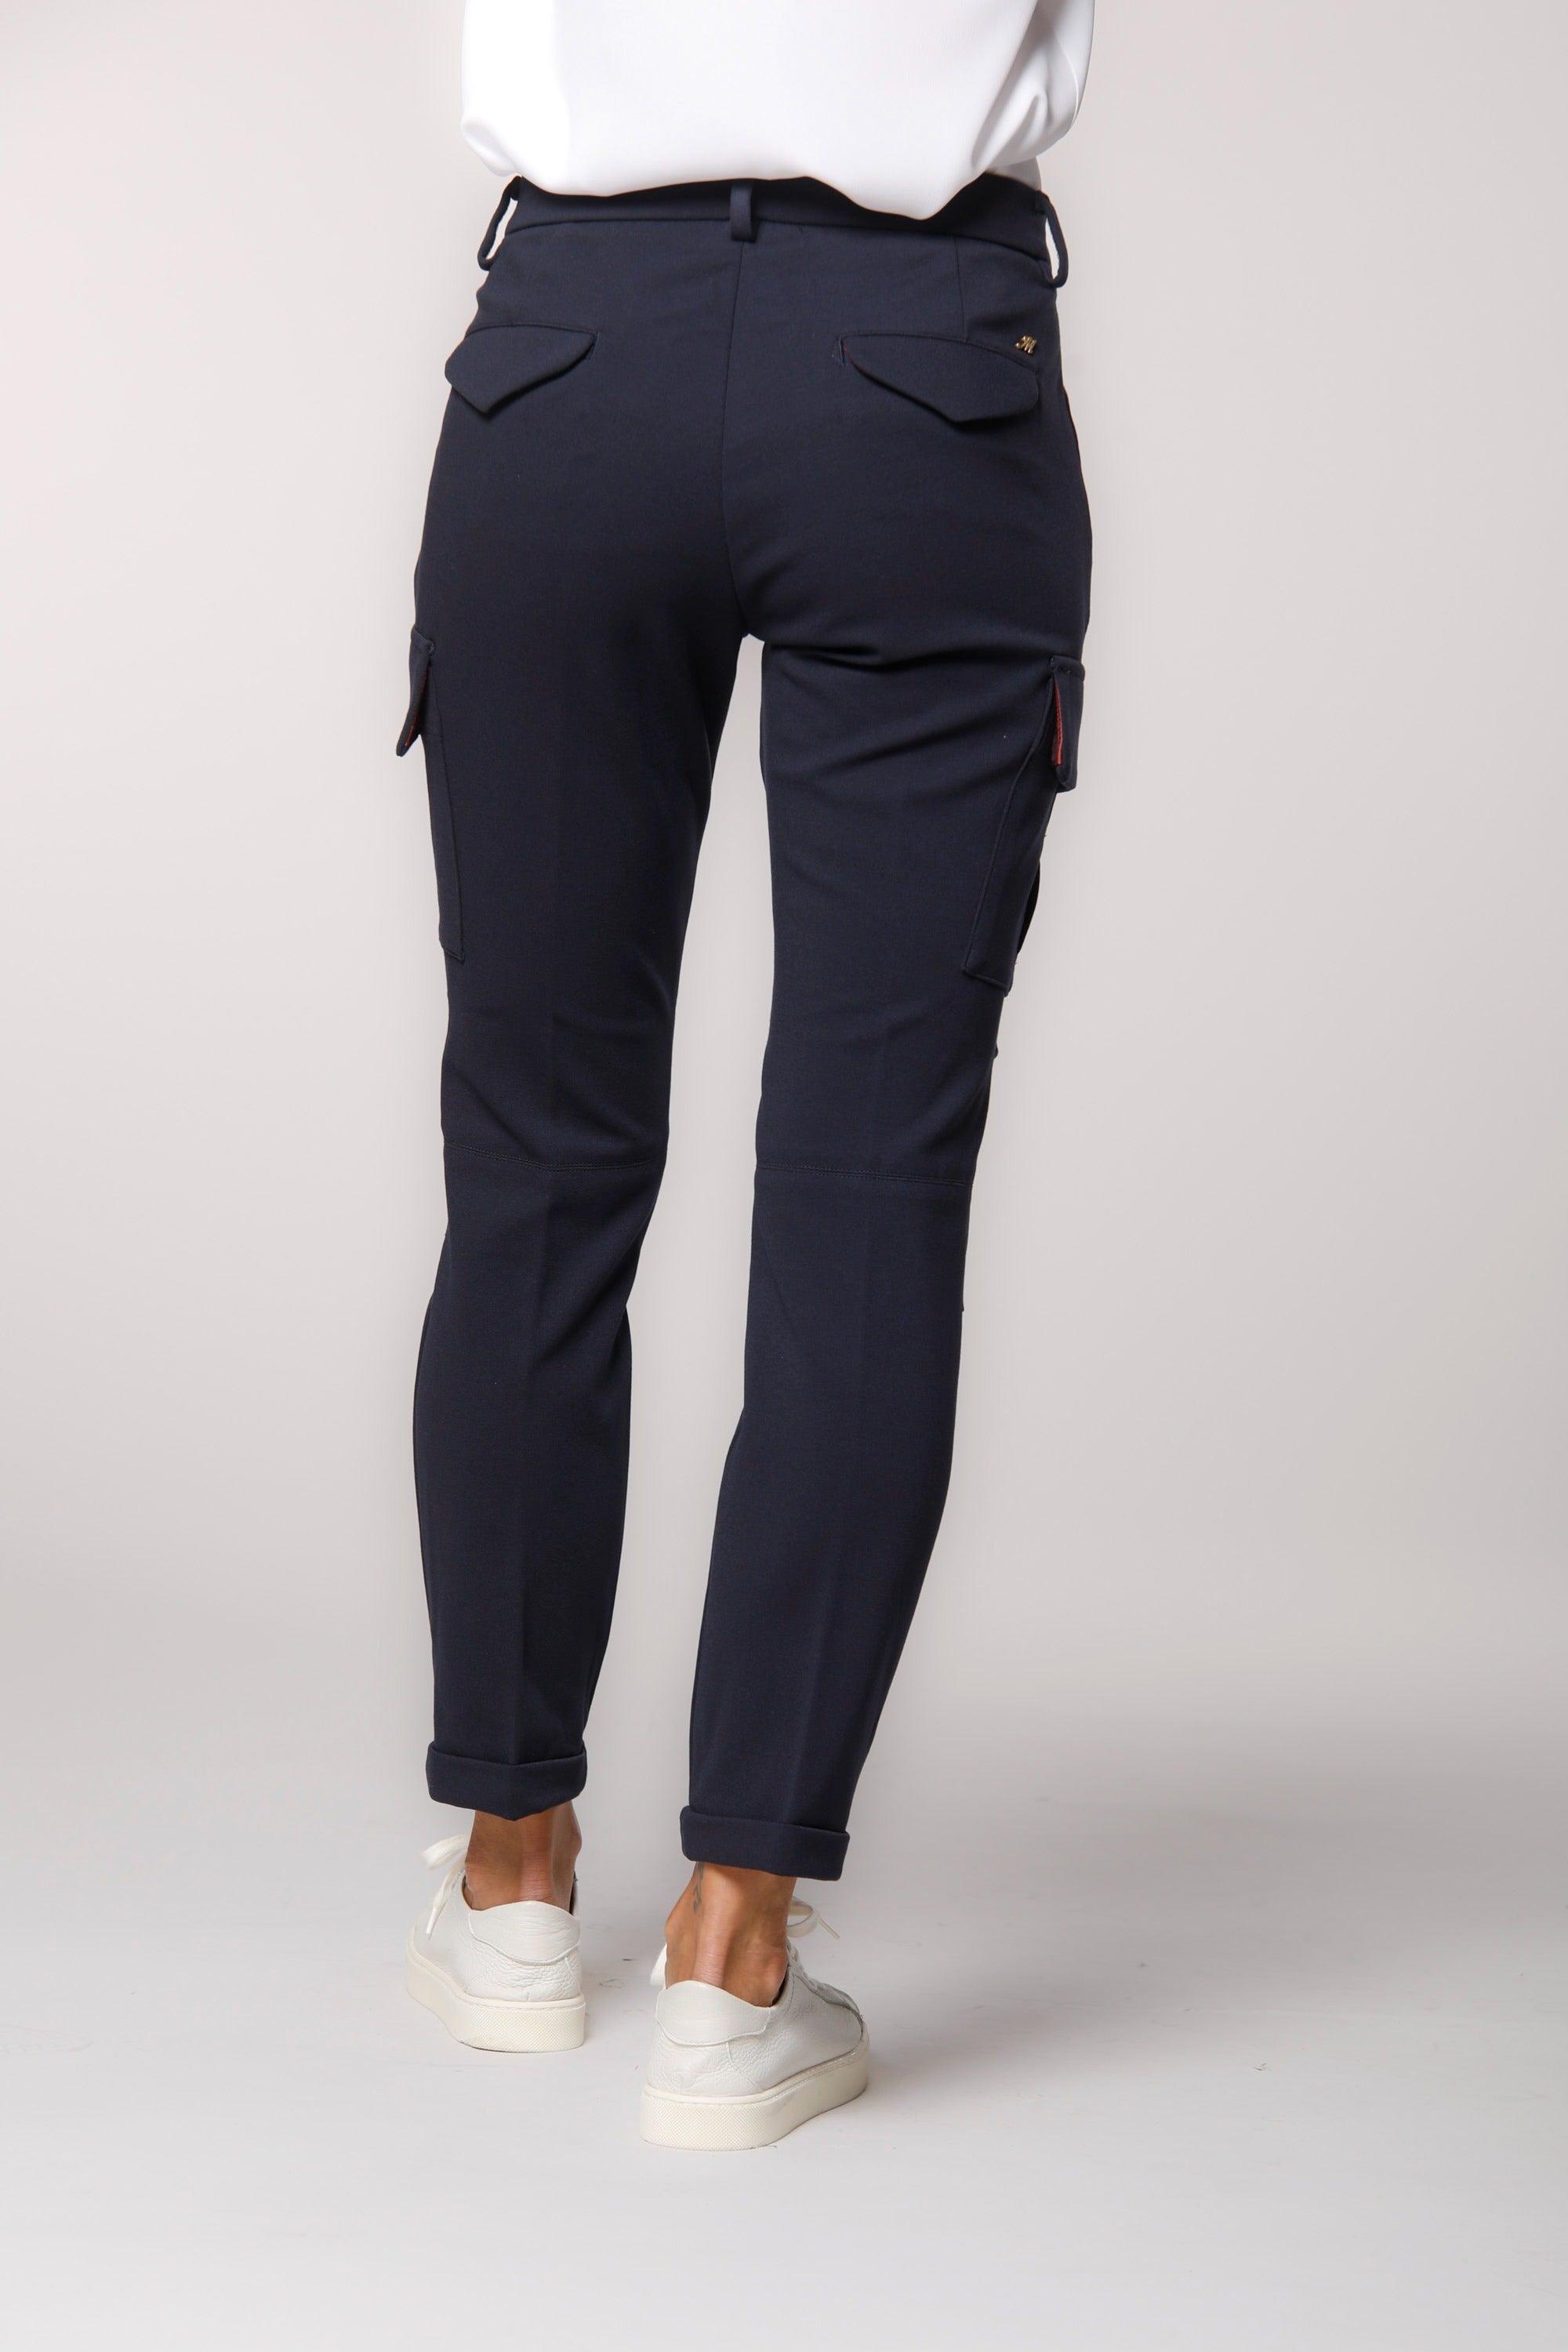 picture 4 of women's Chile City cargo pants in dark blue jersey by Mason's